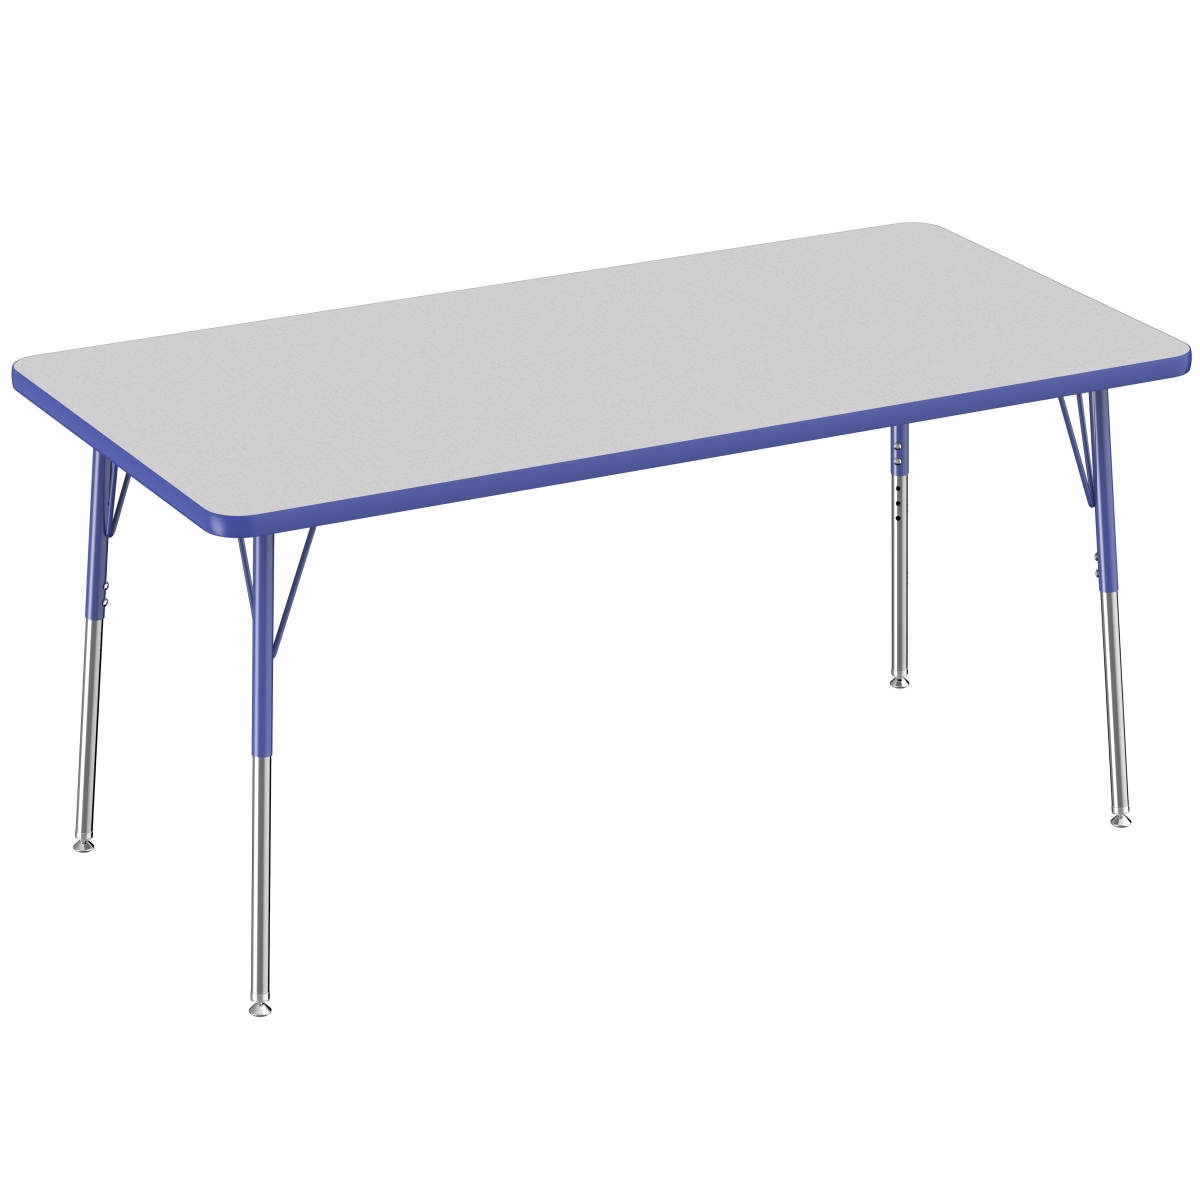 10023-gybl 30 X 60 In. Rectangle T-mold Adjustable Activity Table With Standard Swivel - Grey & Blue